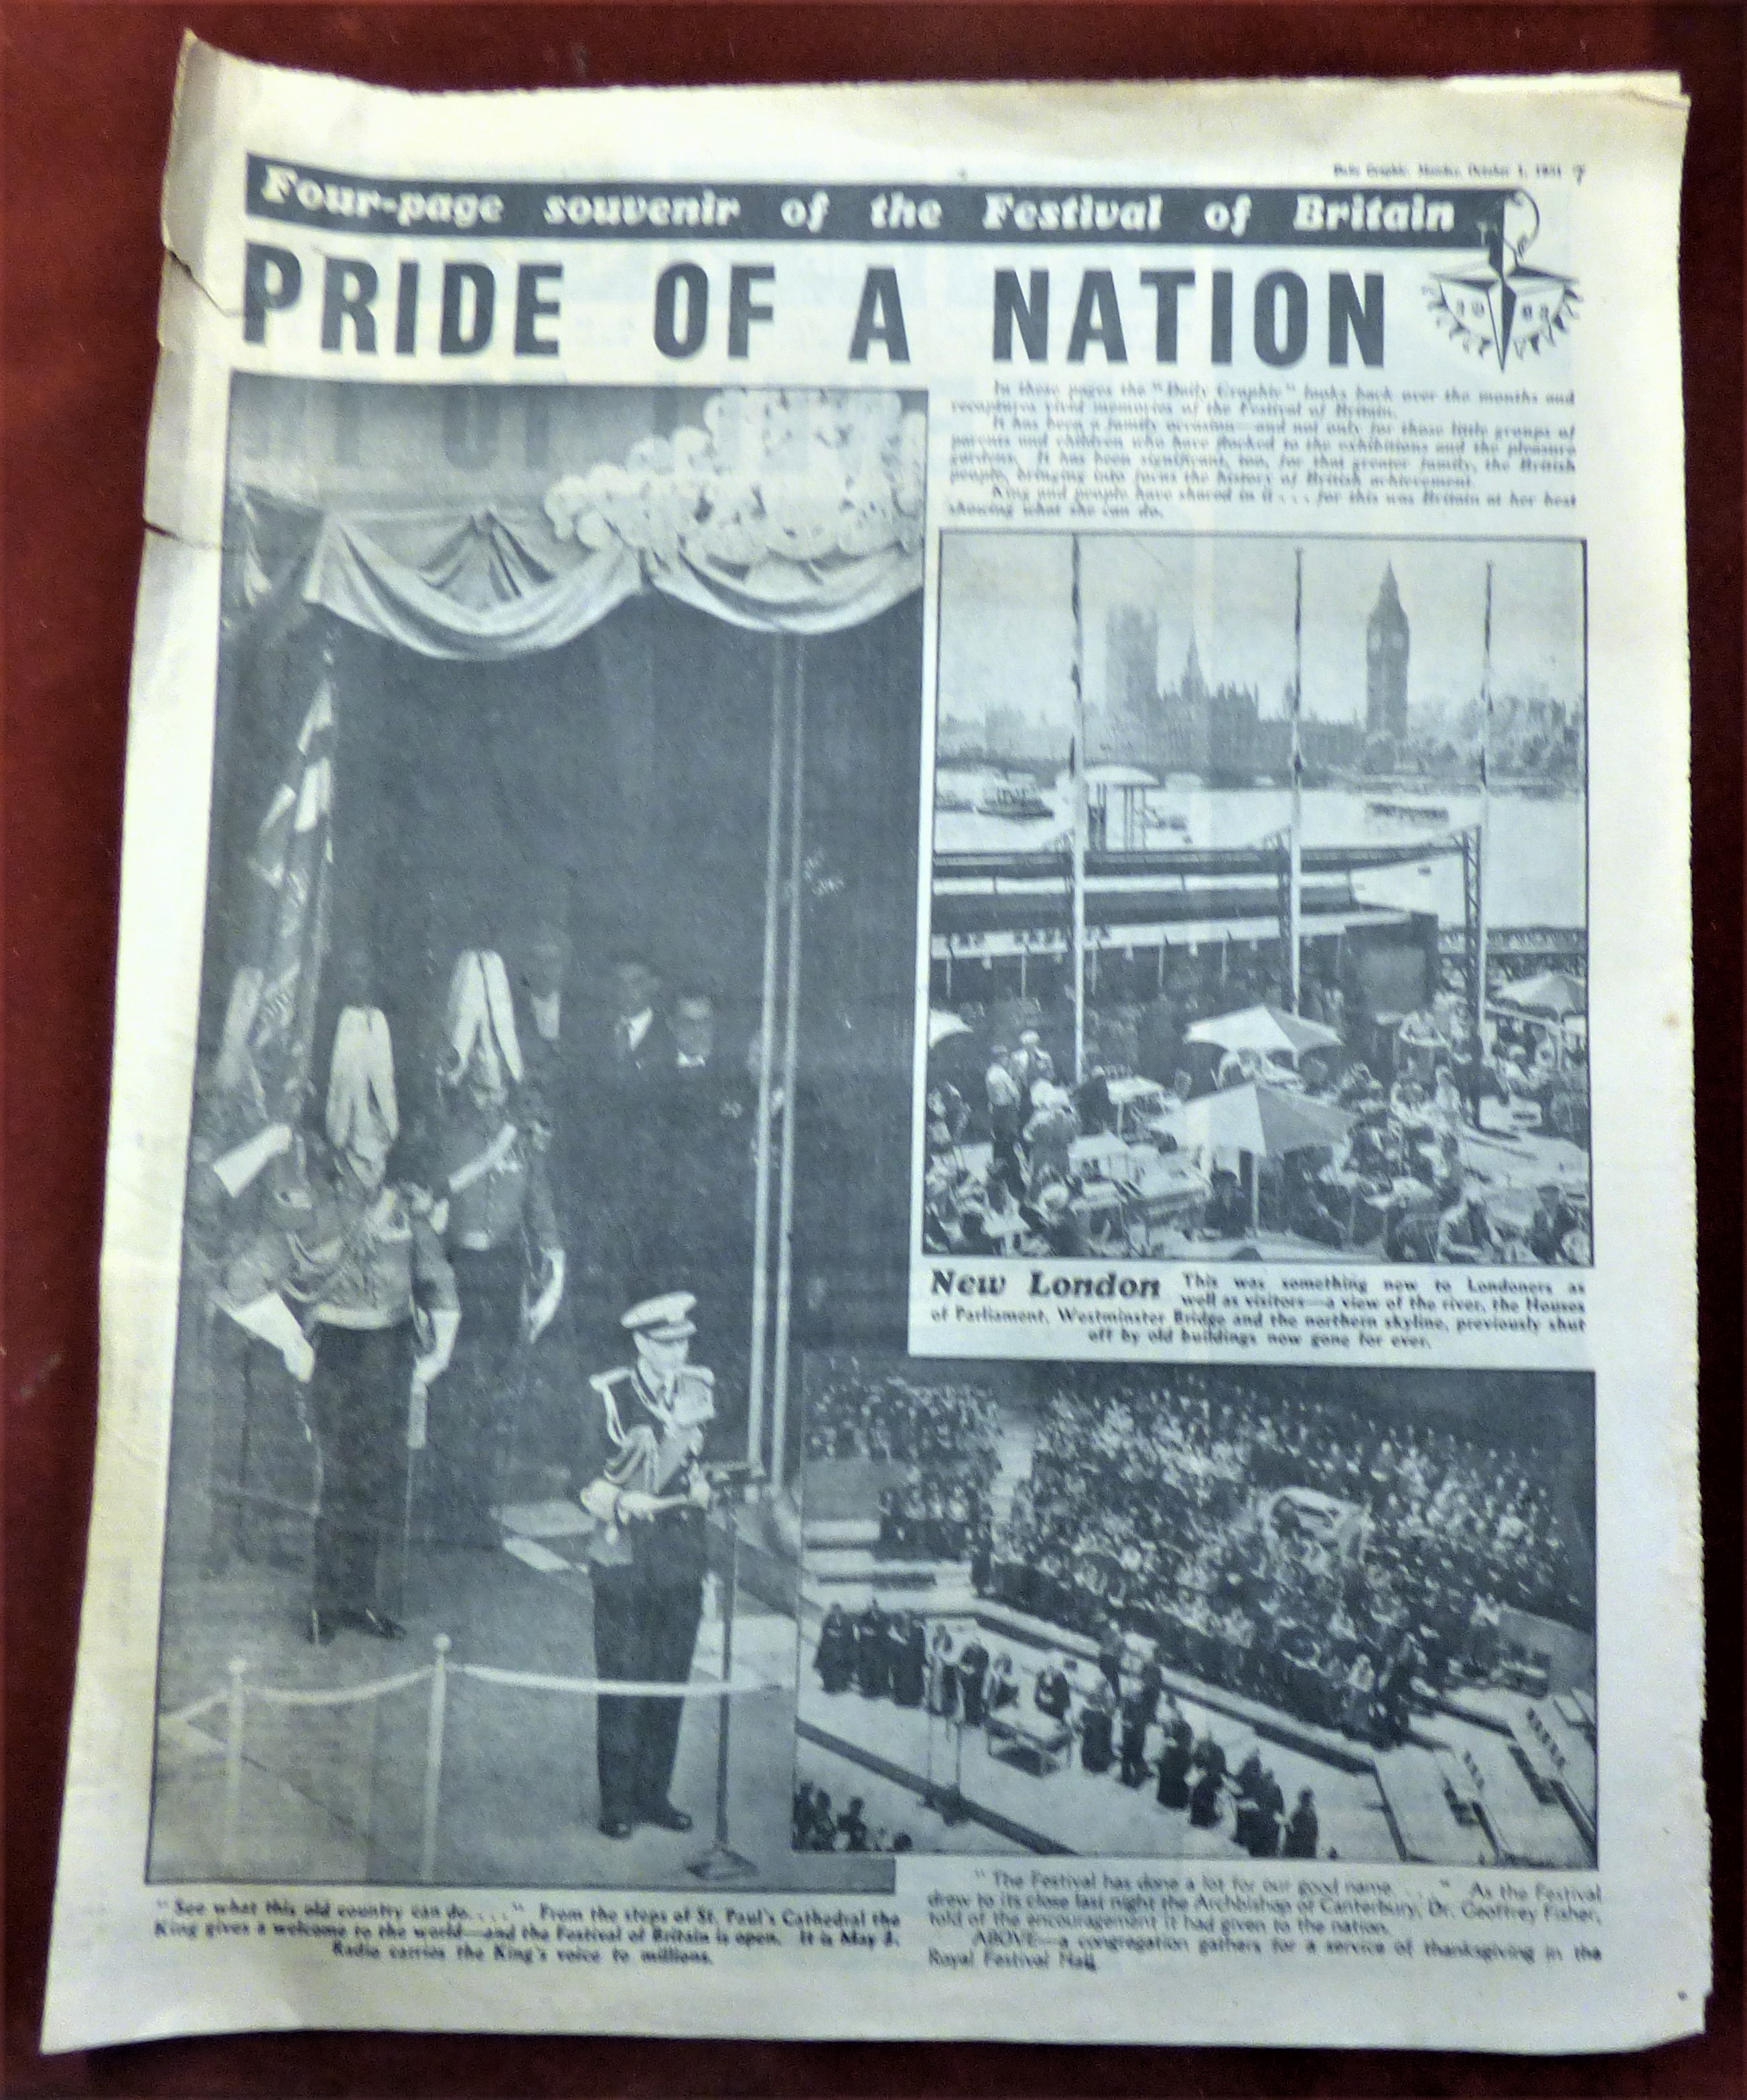 1951 October 1st, Souvenir Four Page Souvenir of the Festival of Britain, Daily Graphic.